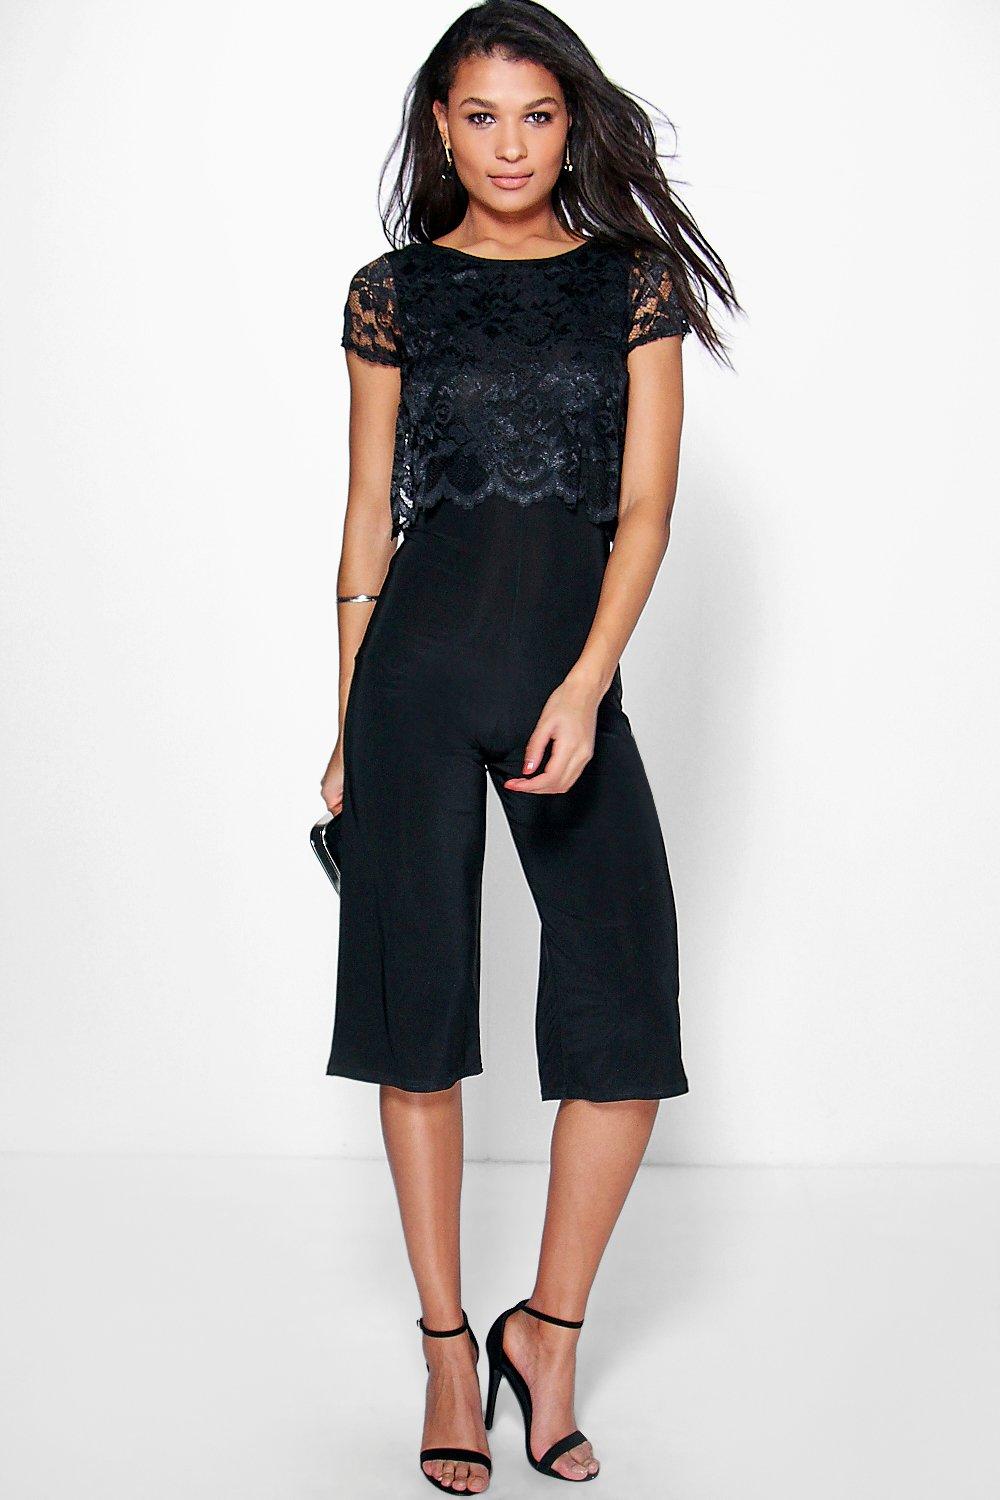 Boohoo Womens Petite Willow Lace Overlay Culotte Jumpsuit | eBay